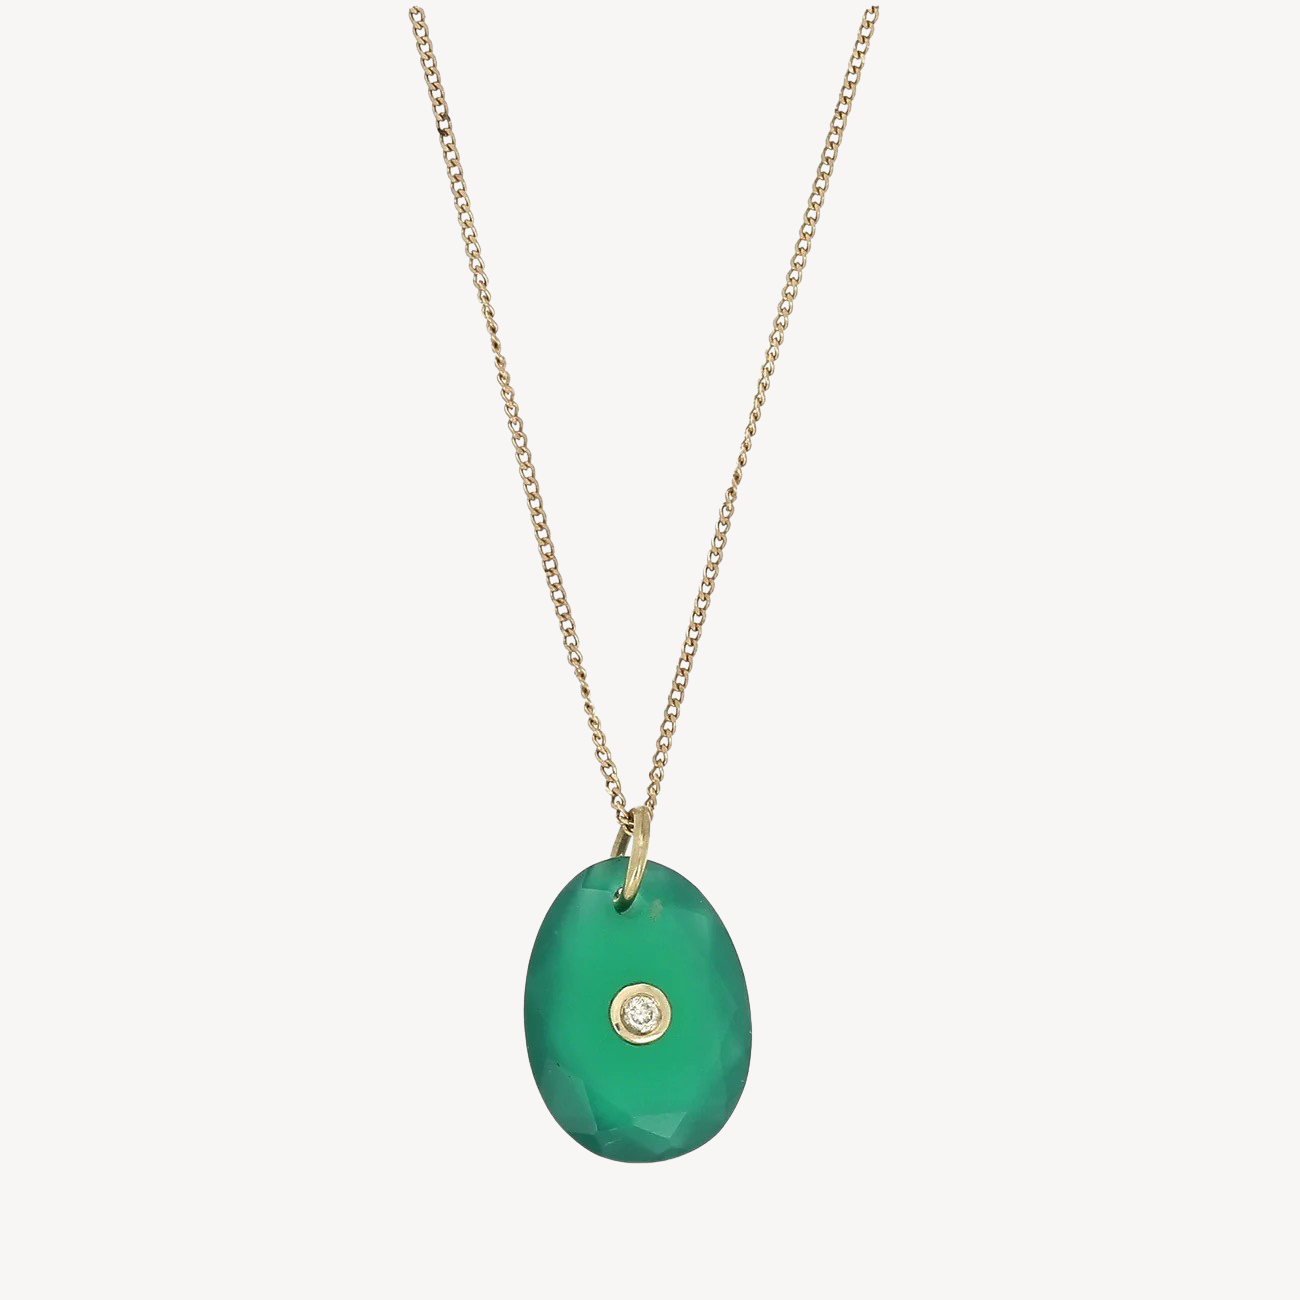 Orso n°1 Necklace Green Onyx